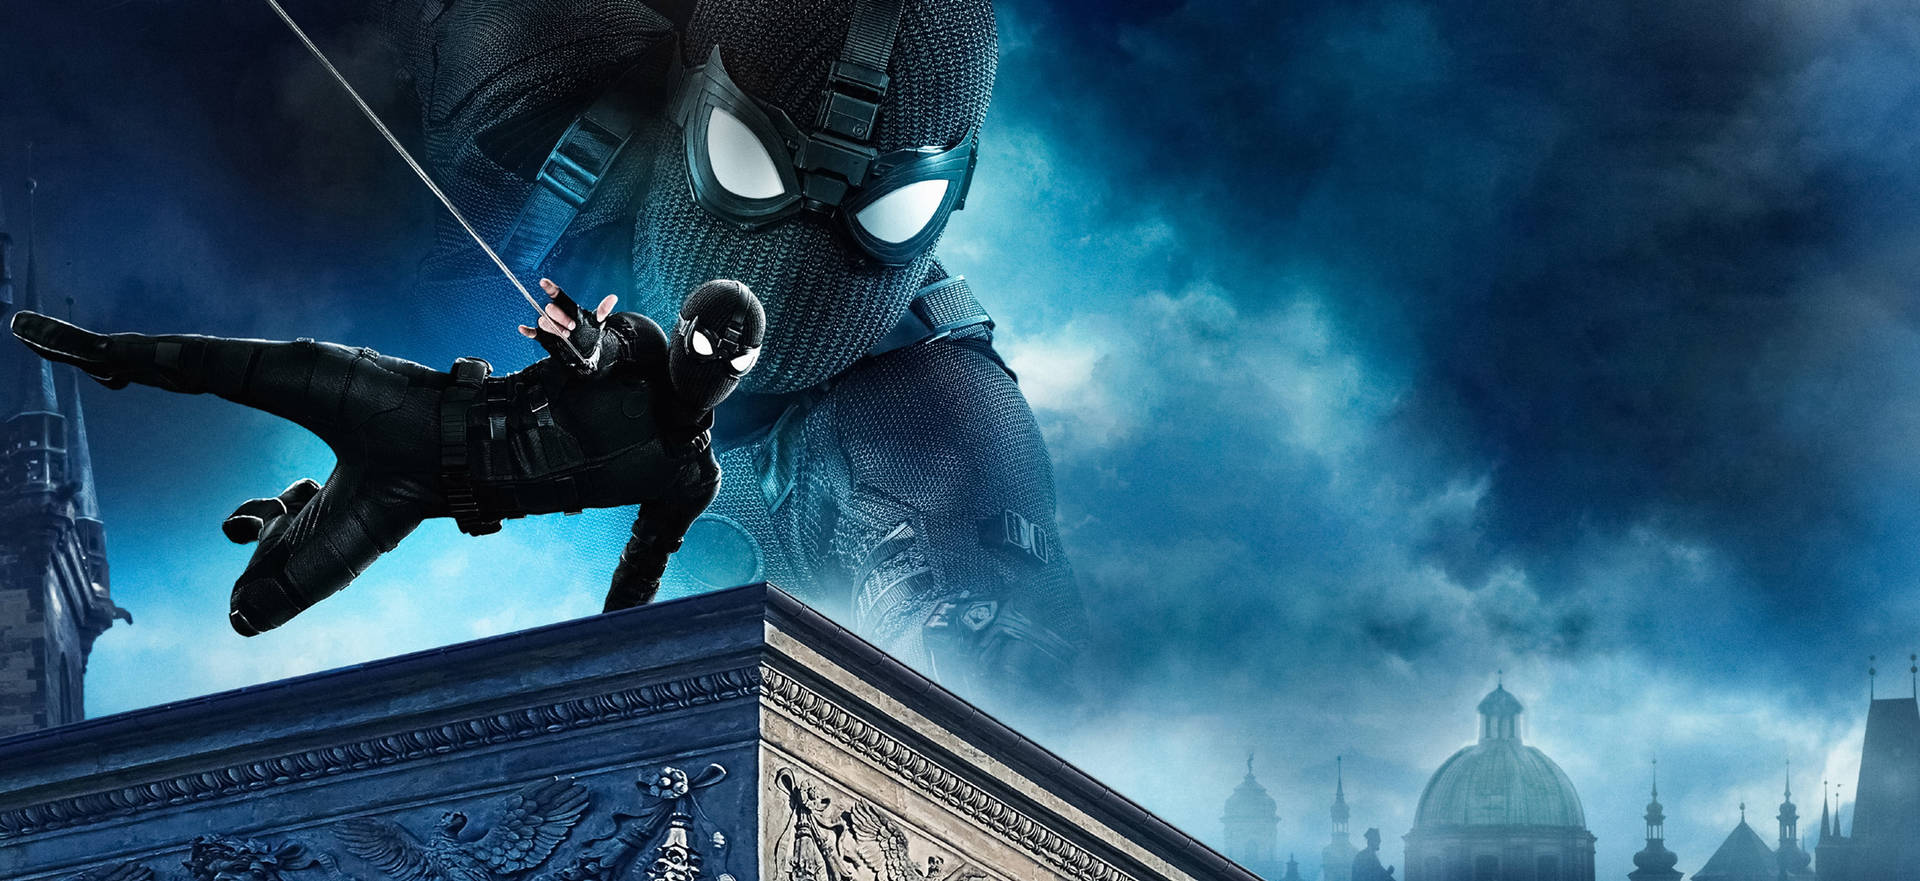 Cloudy Blue Spider Man Far From Home 2019 Wallpaper